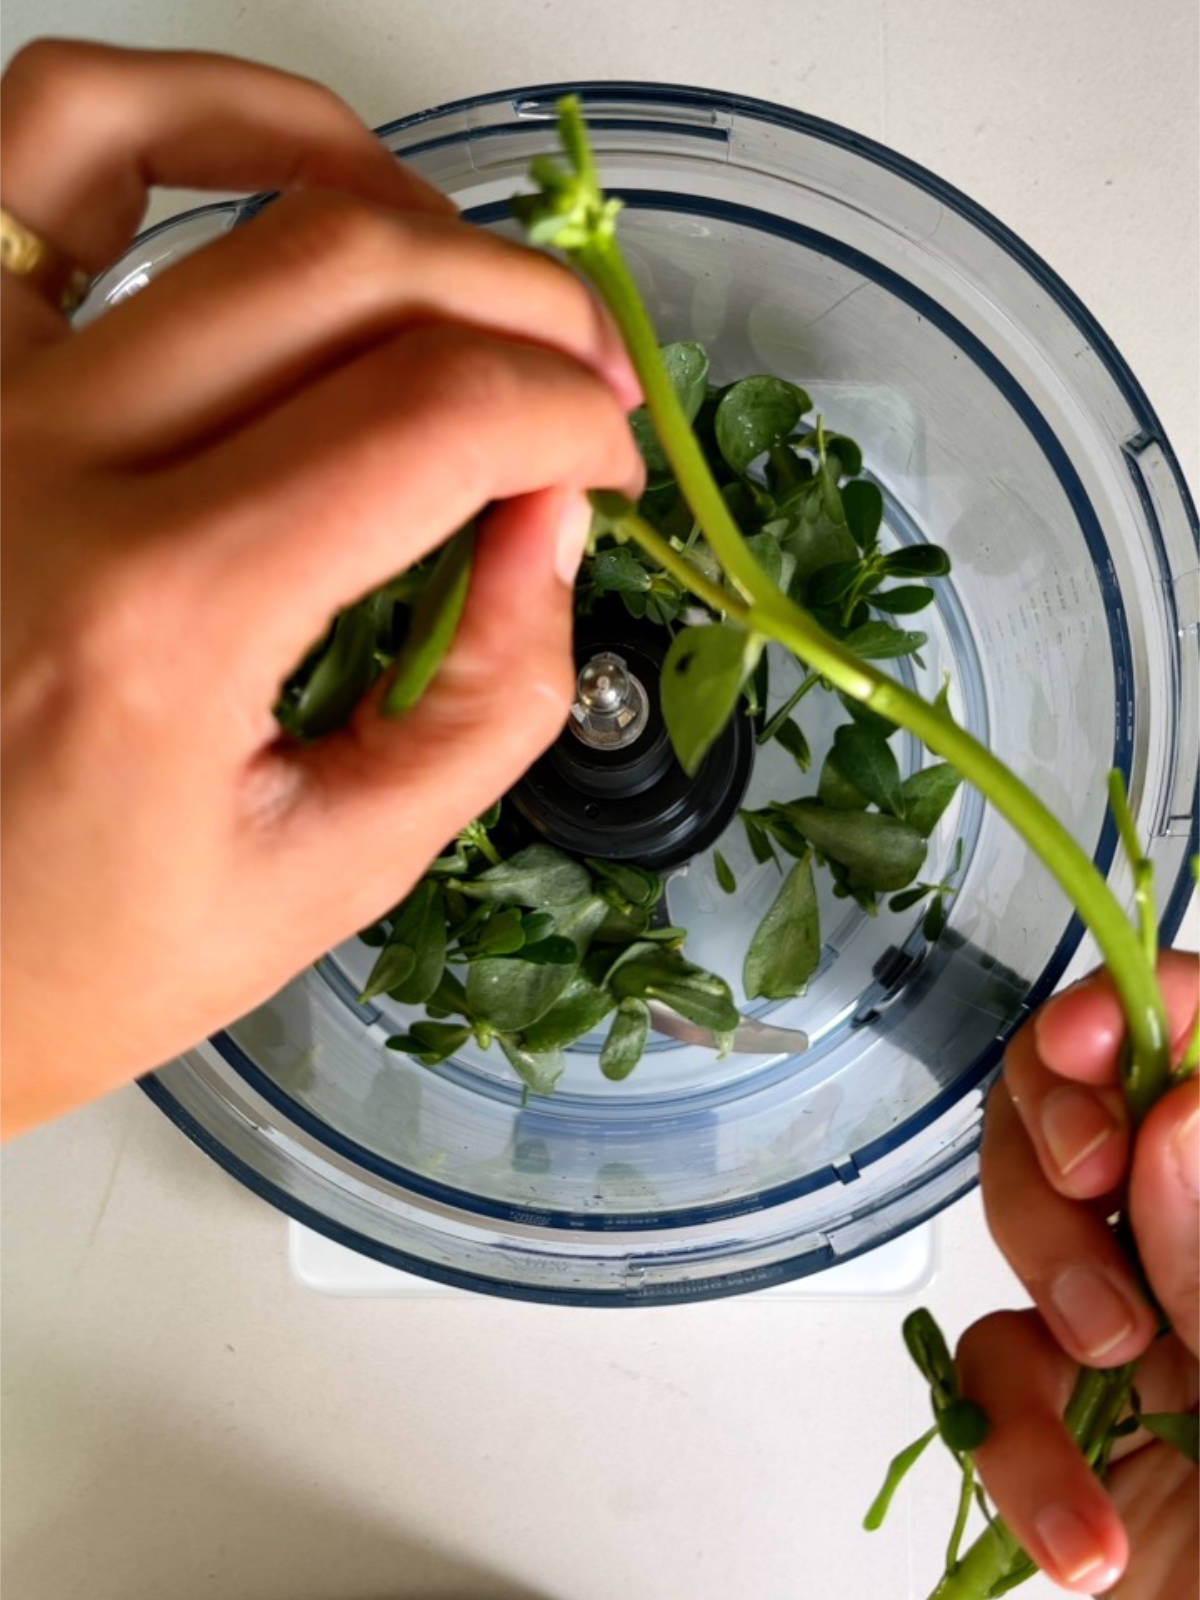 Trimming a long stem of purslane over a food processor bowl filled with purslane leaves.